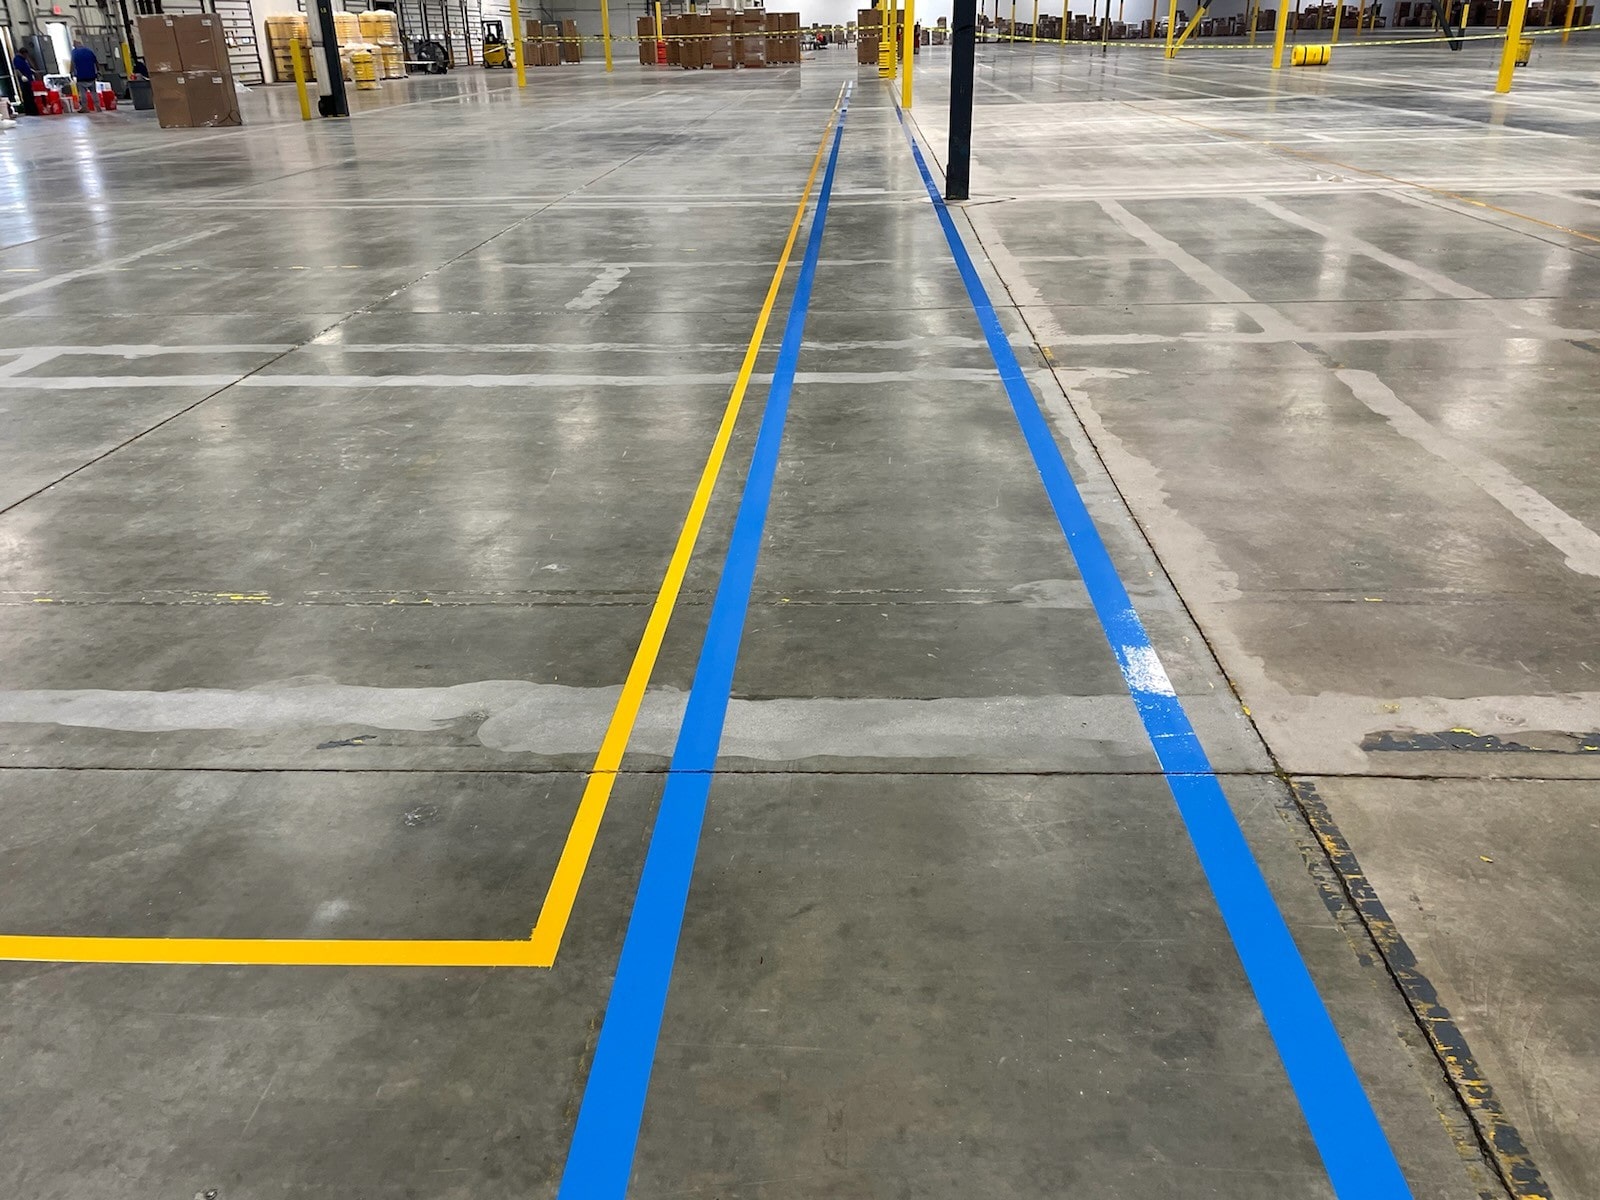 customized lines for pedestrians to travel through the facility